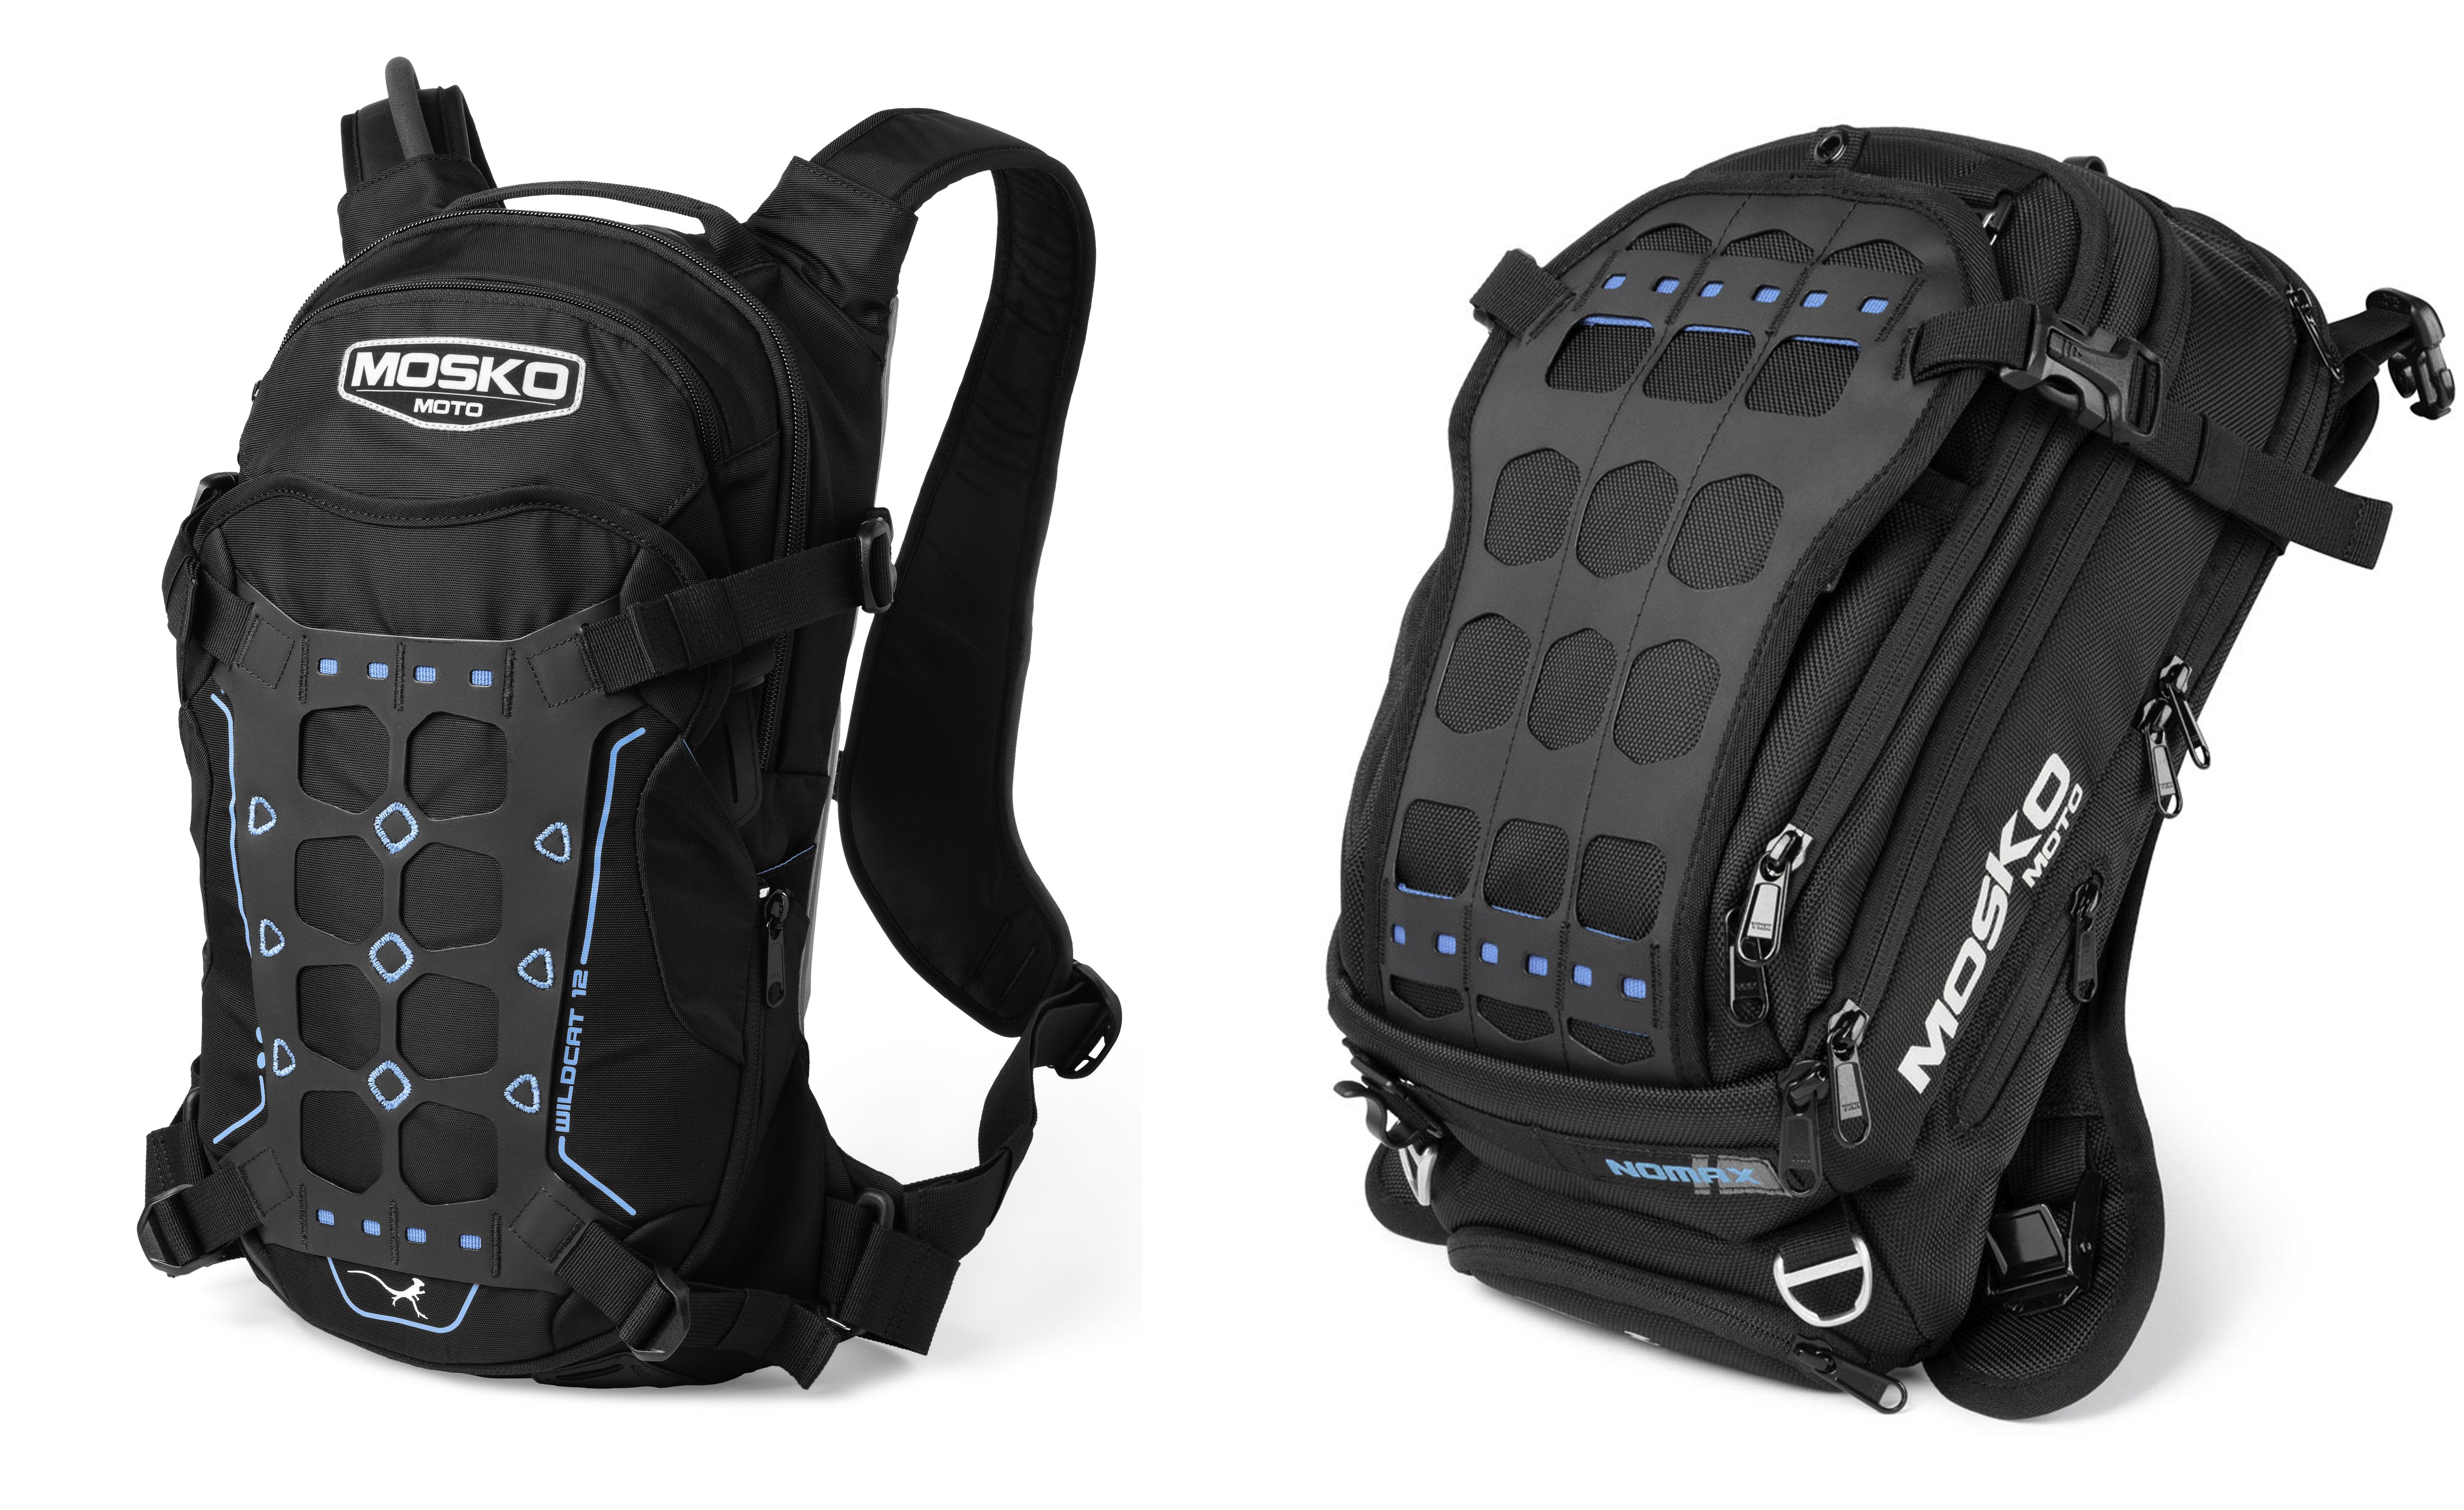 Motorcycle.com December Giveaway: Two Mosko Moto Wildcat 12L With Chest Rig And Nomax Tank Bag!